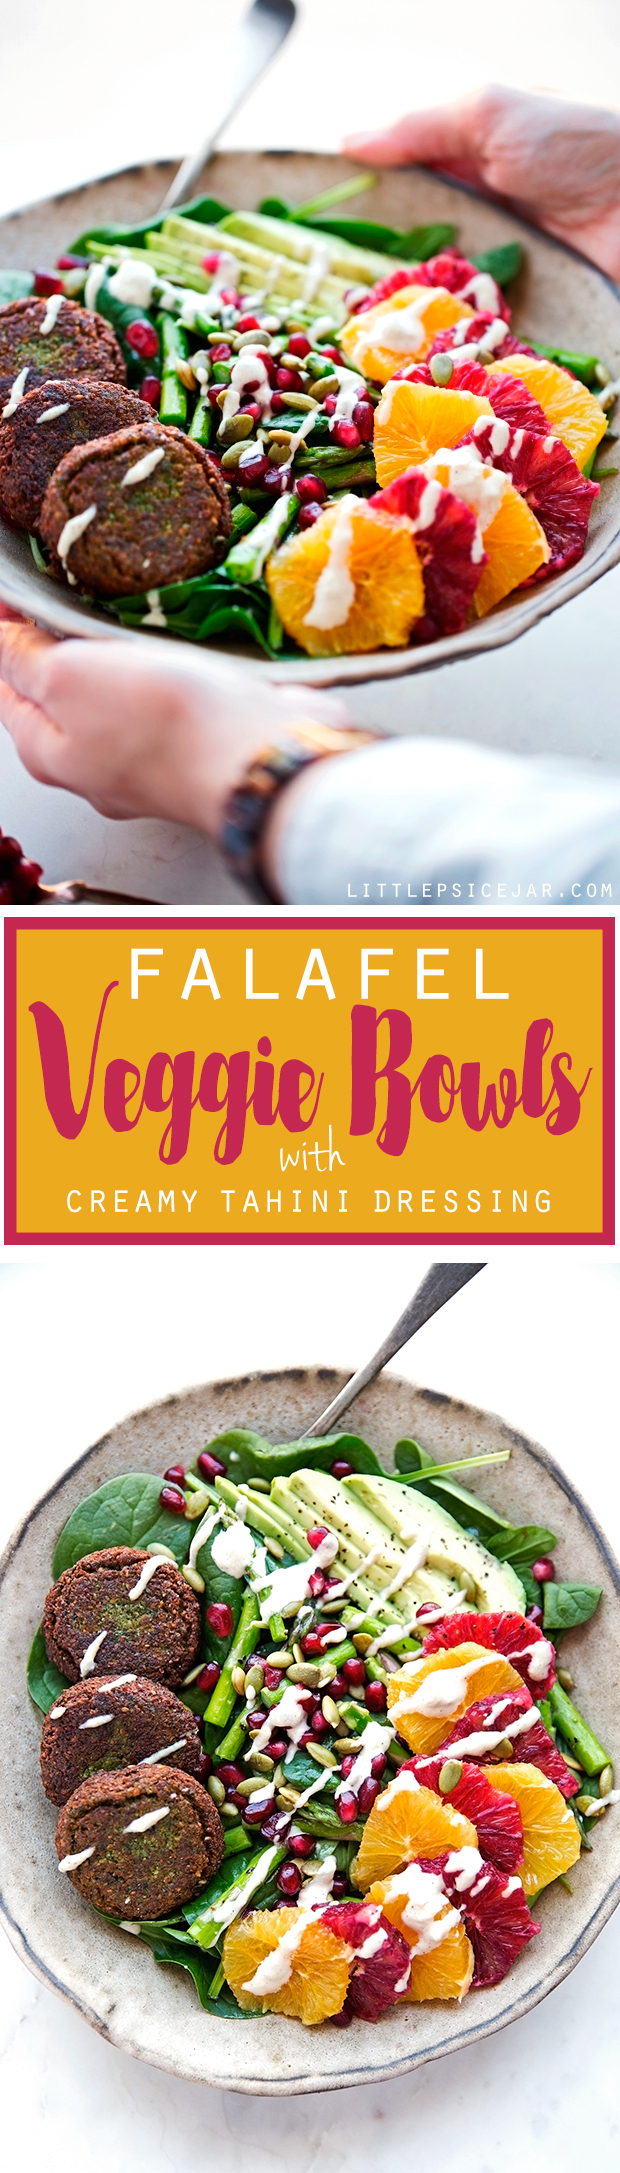 Falafel Veggie Bowls with Tahini Dressing - Superfood loaded salads with creamy tahini and homemade falafels! #tahinidressing #veggiebowls #falafel | Littlespicejar.com